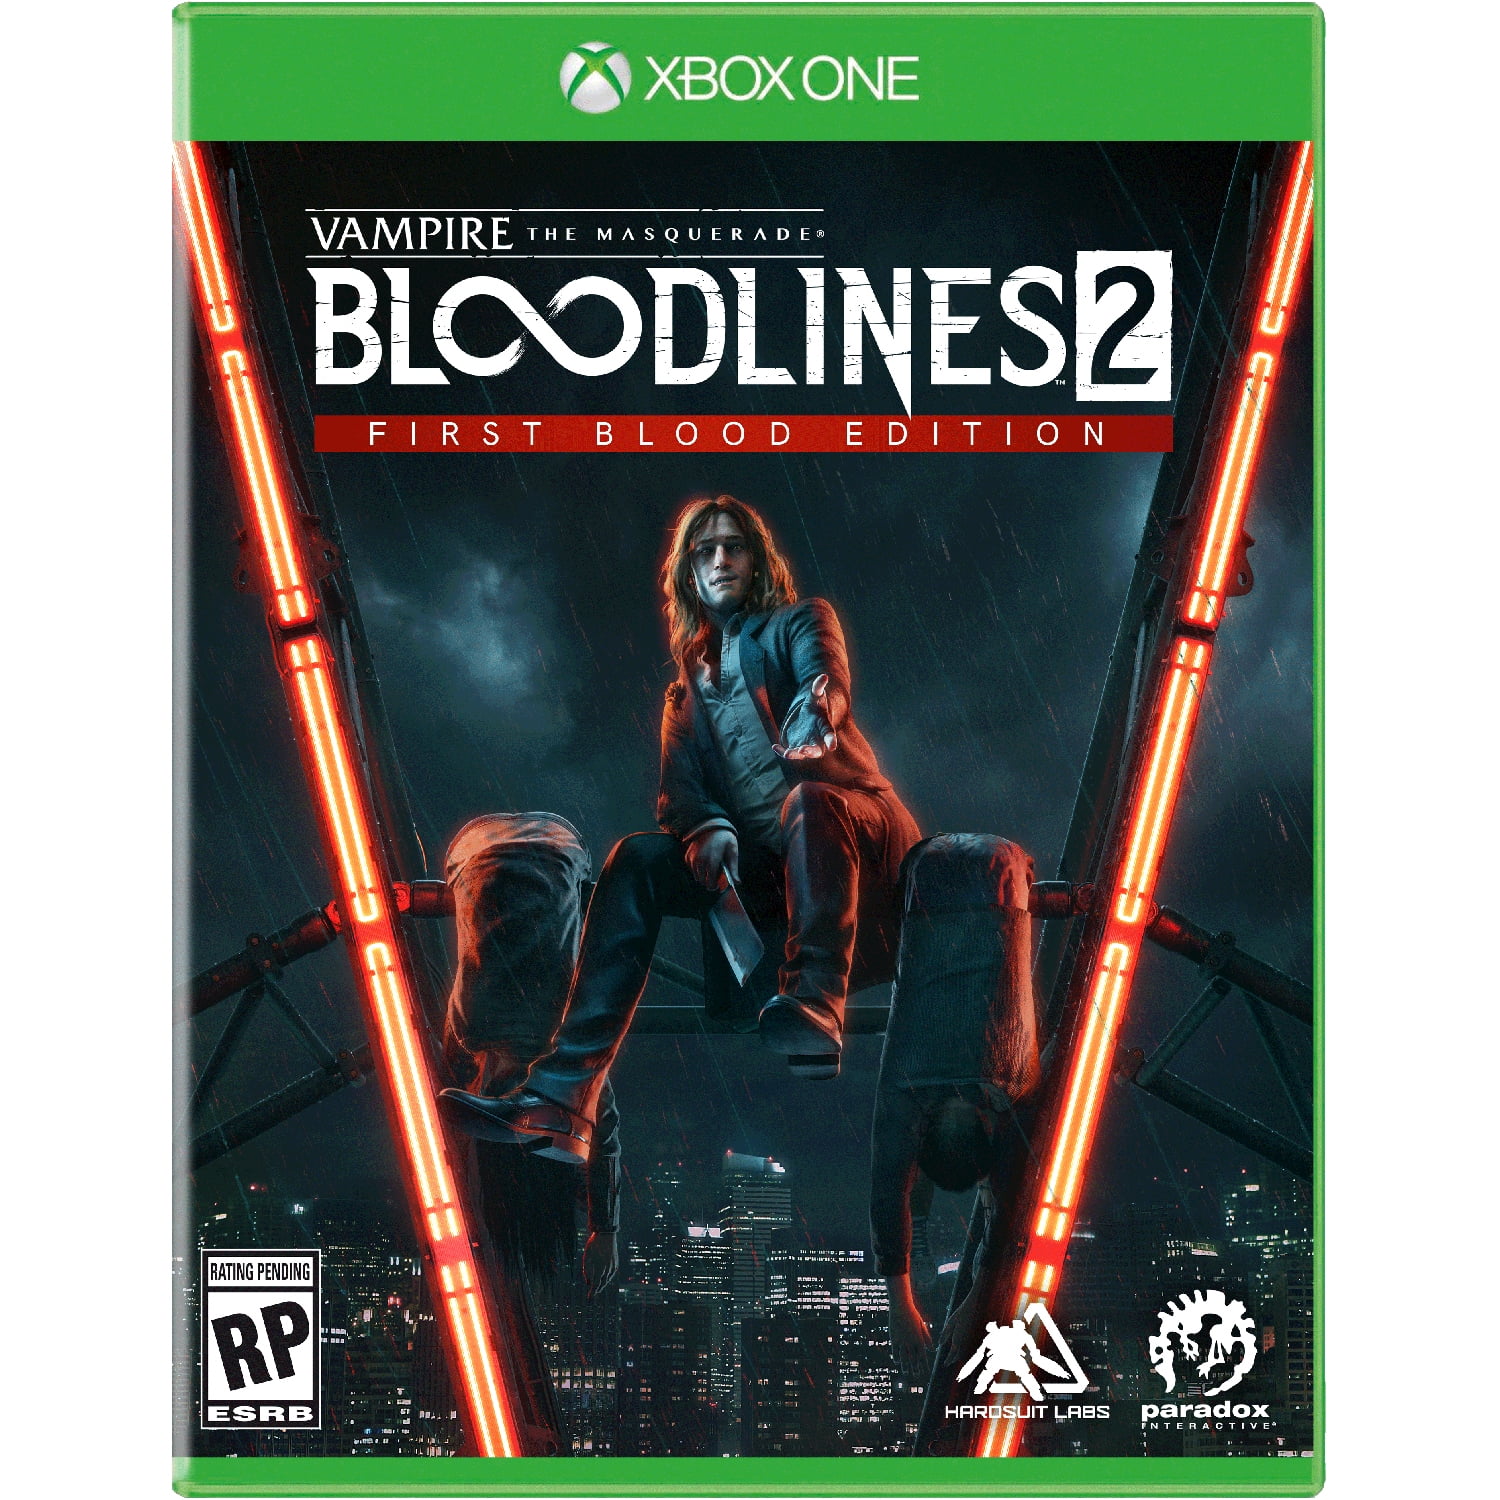 Vampire The Masquerade Bloodlines 2 All Editions Detailed • Collect a Box